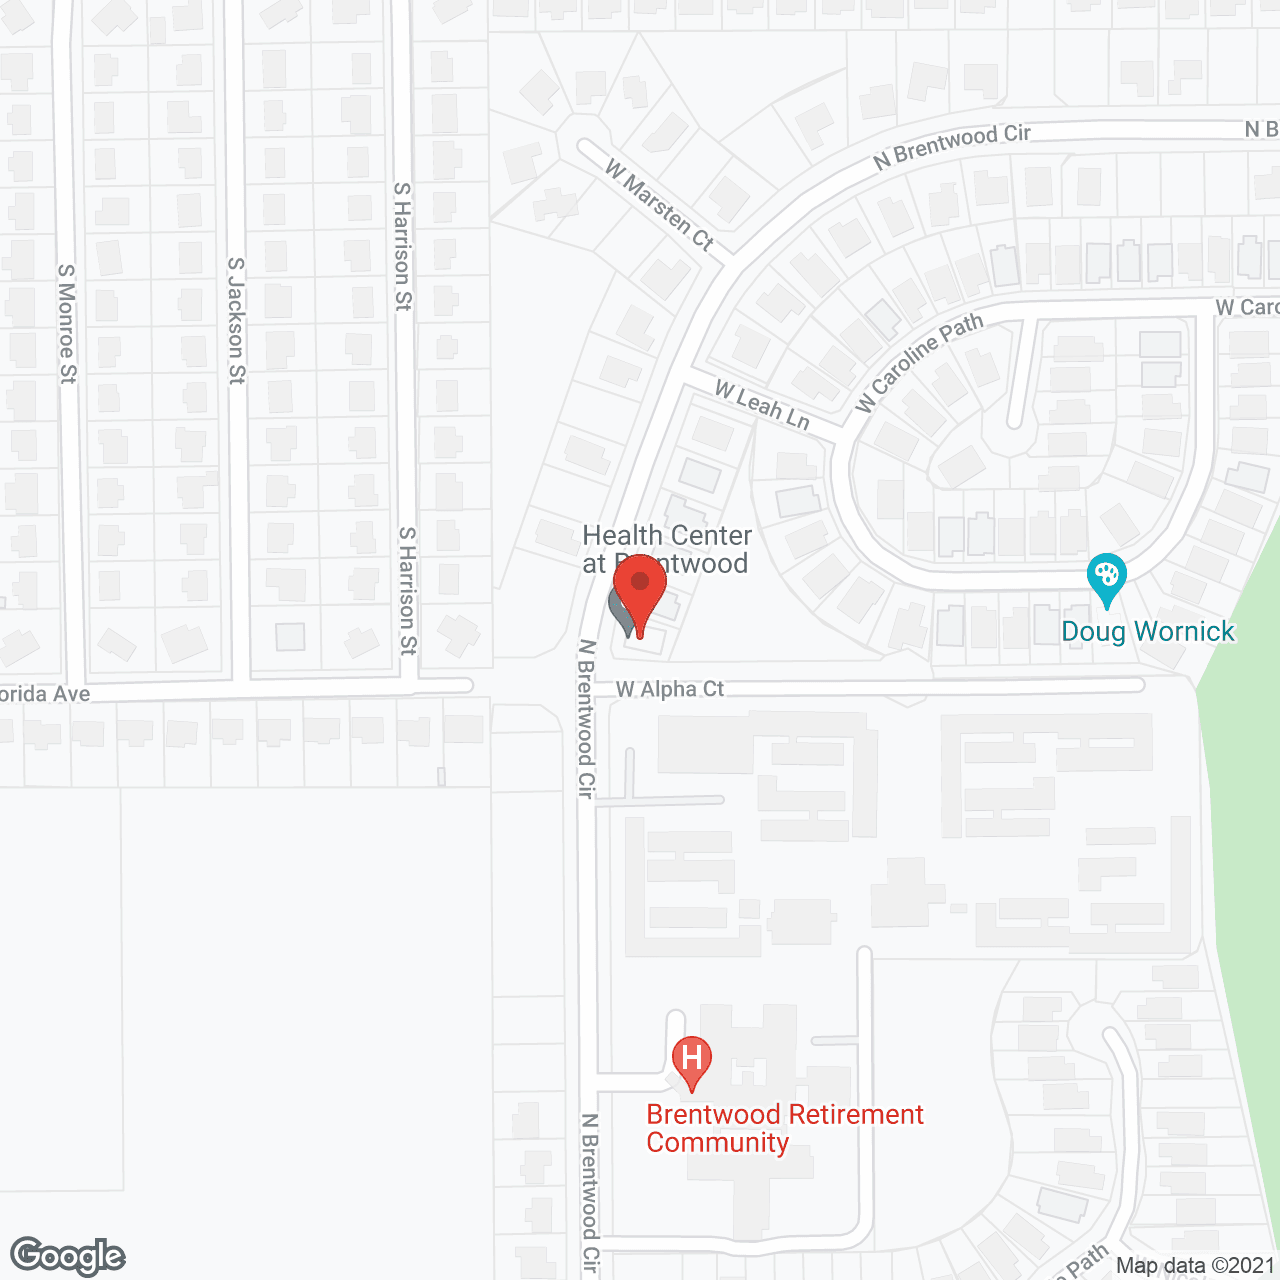 Health Center at Brentwood in google map